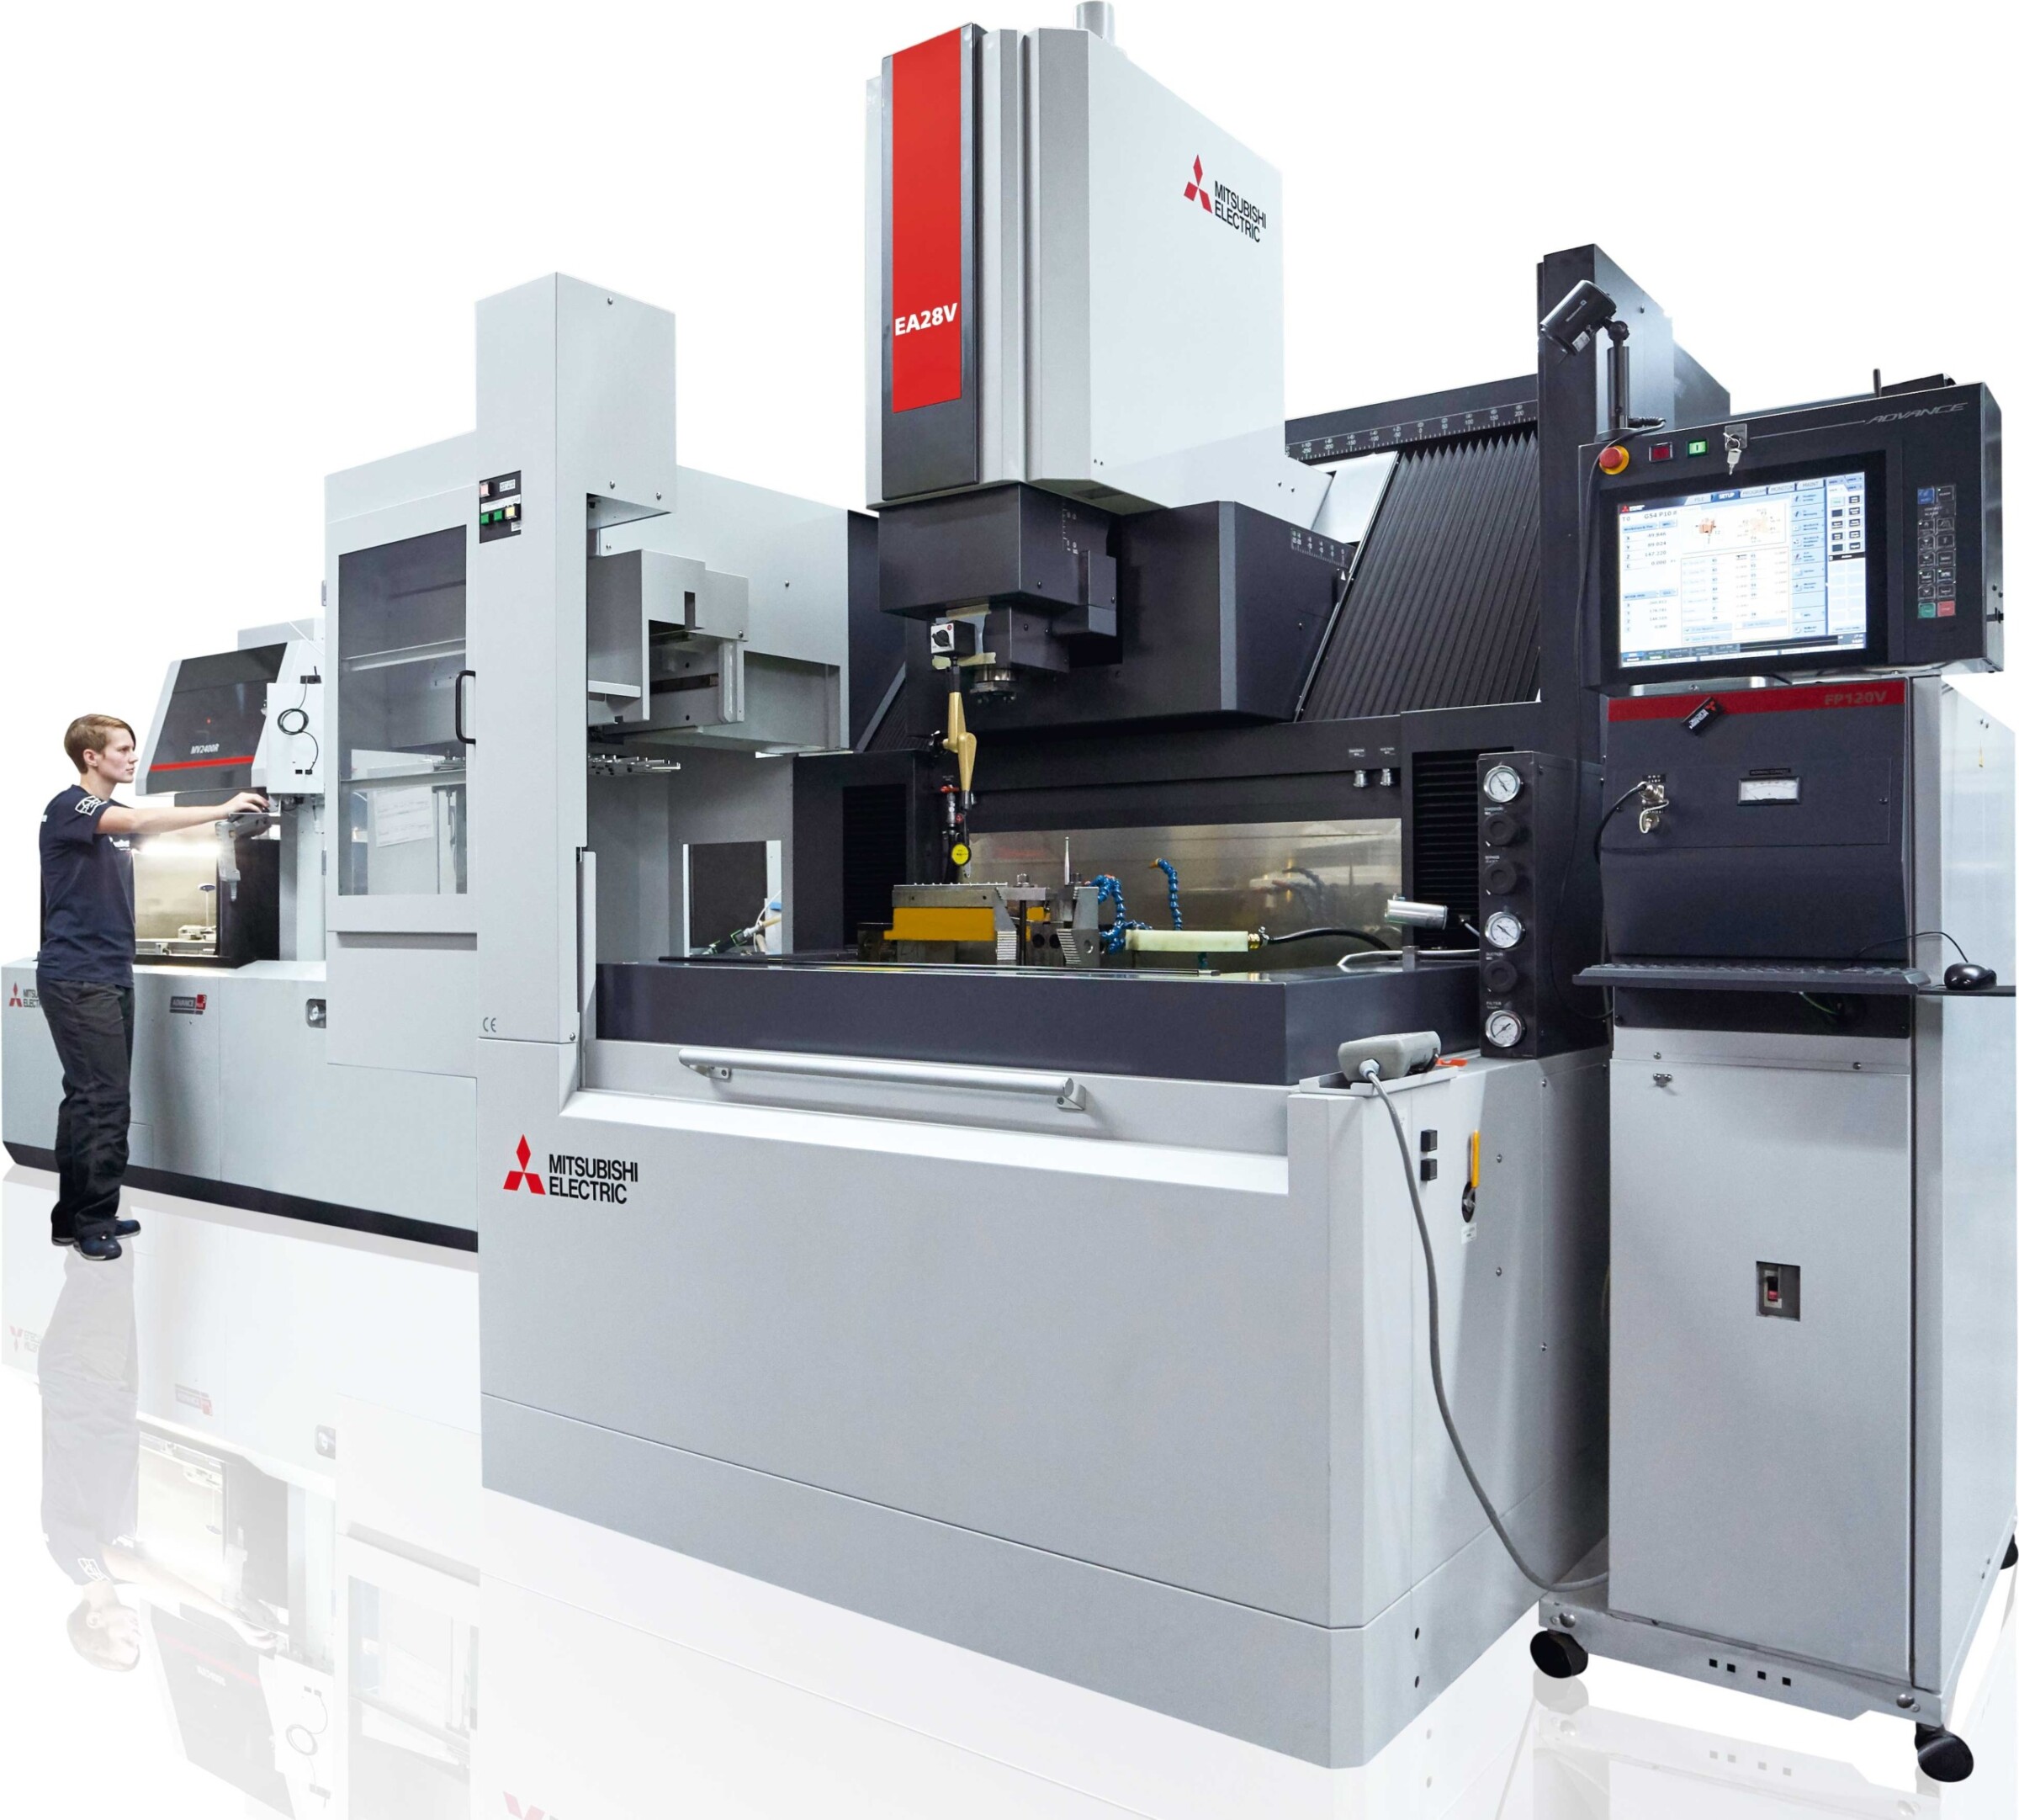 The quality of the die-sinking and wire-cut EDM processes is decisive for the final result